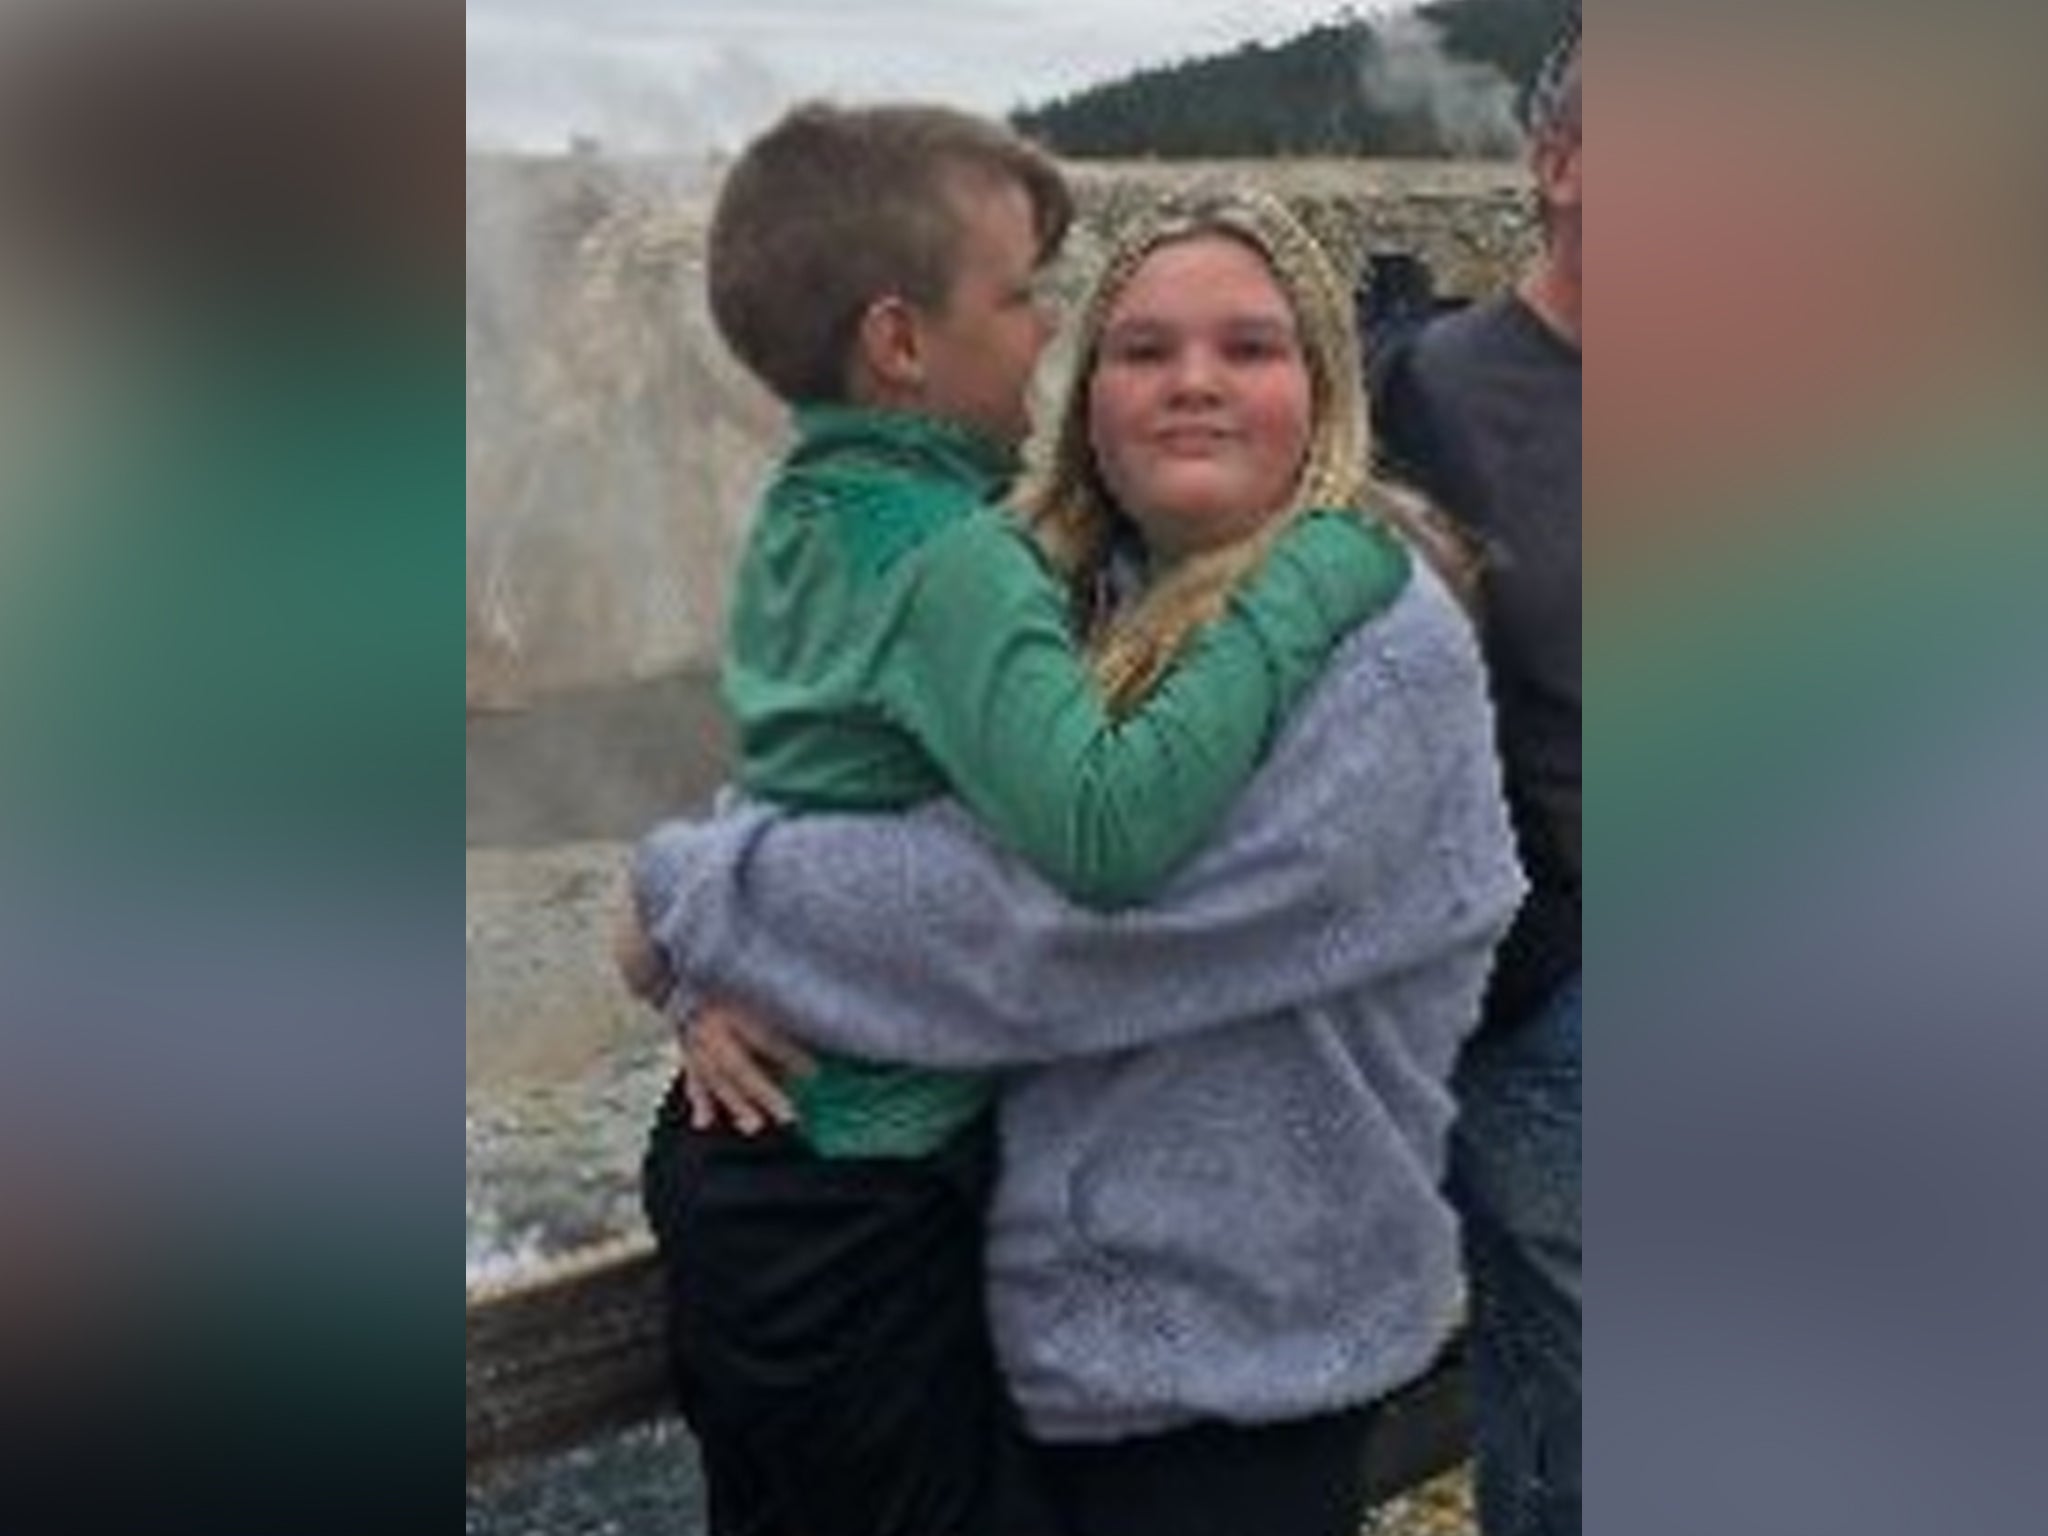 Tylee Ryan, 17, and her seven-year-old brother JJ Ryan, have been missing for months